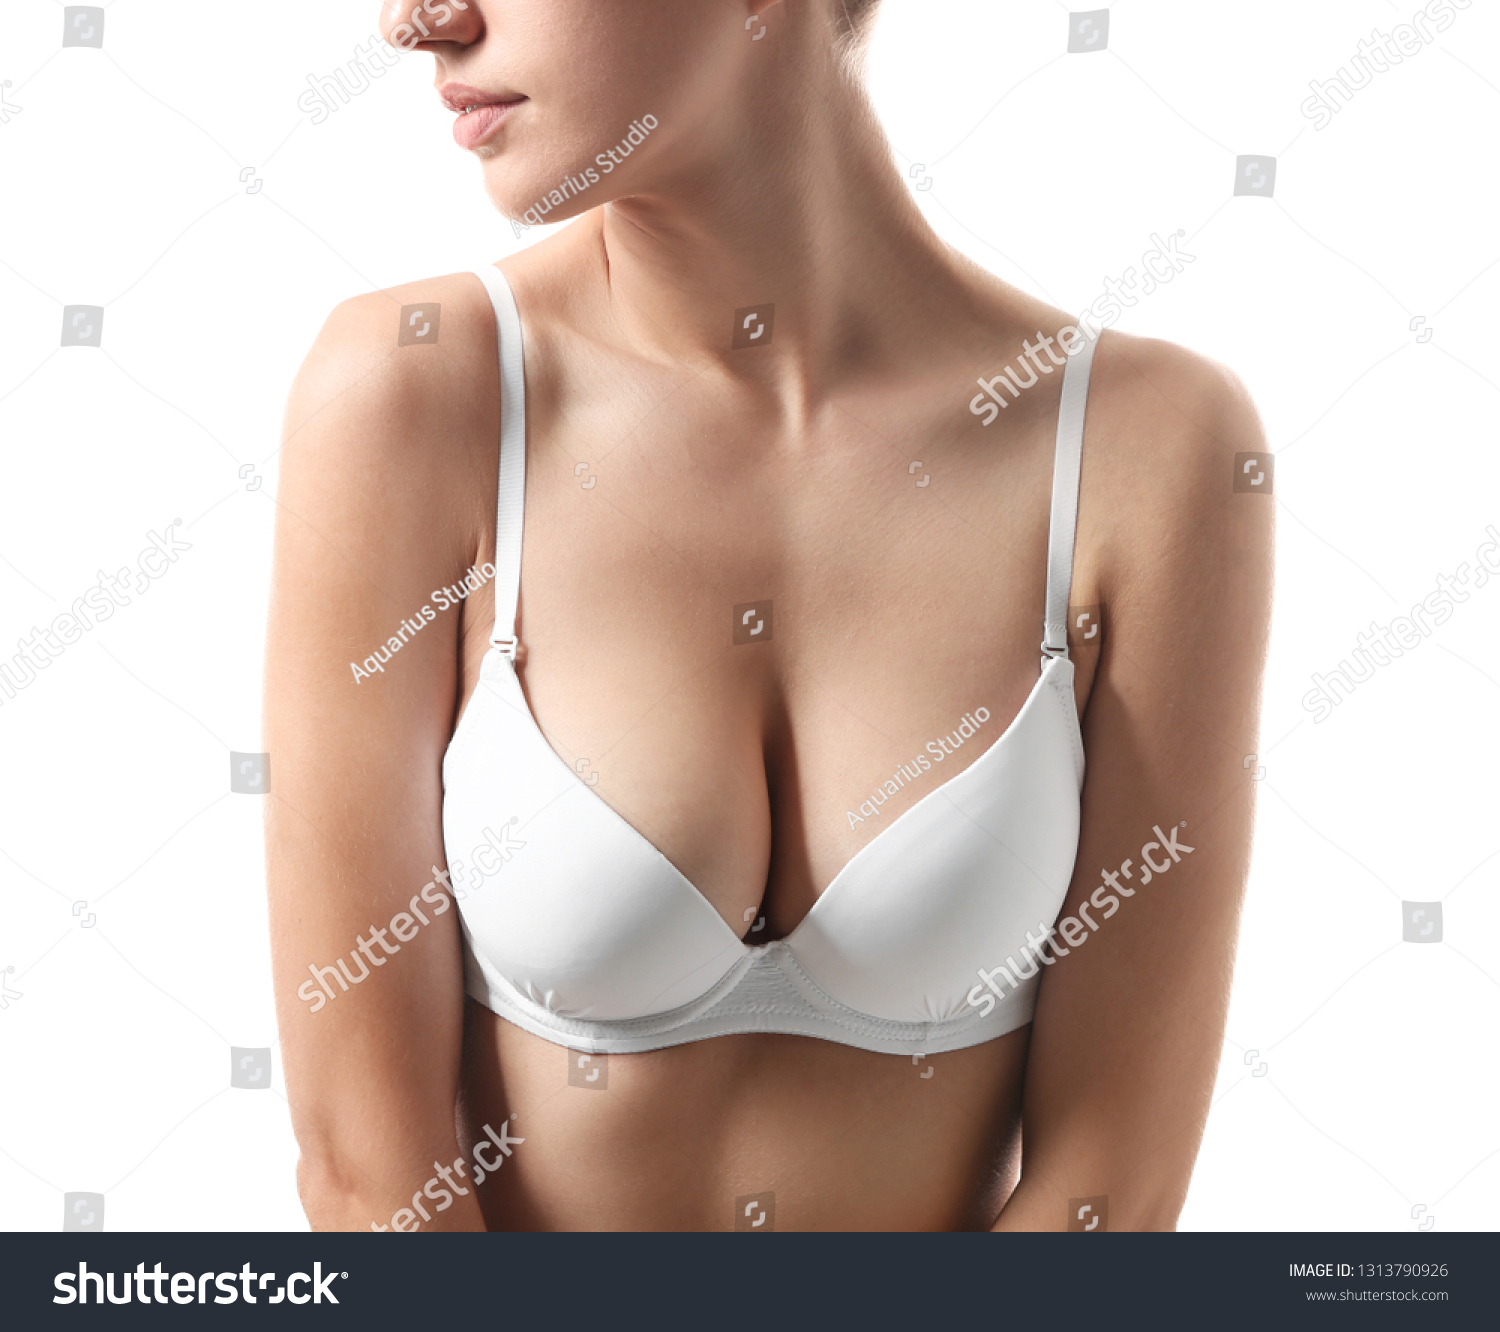 Girl breast picture